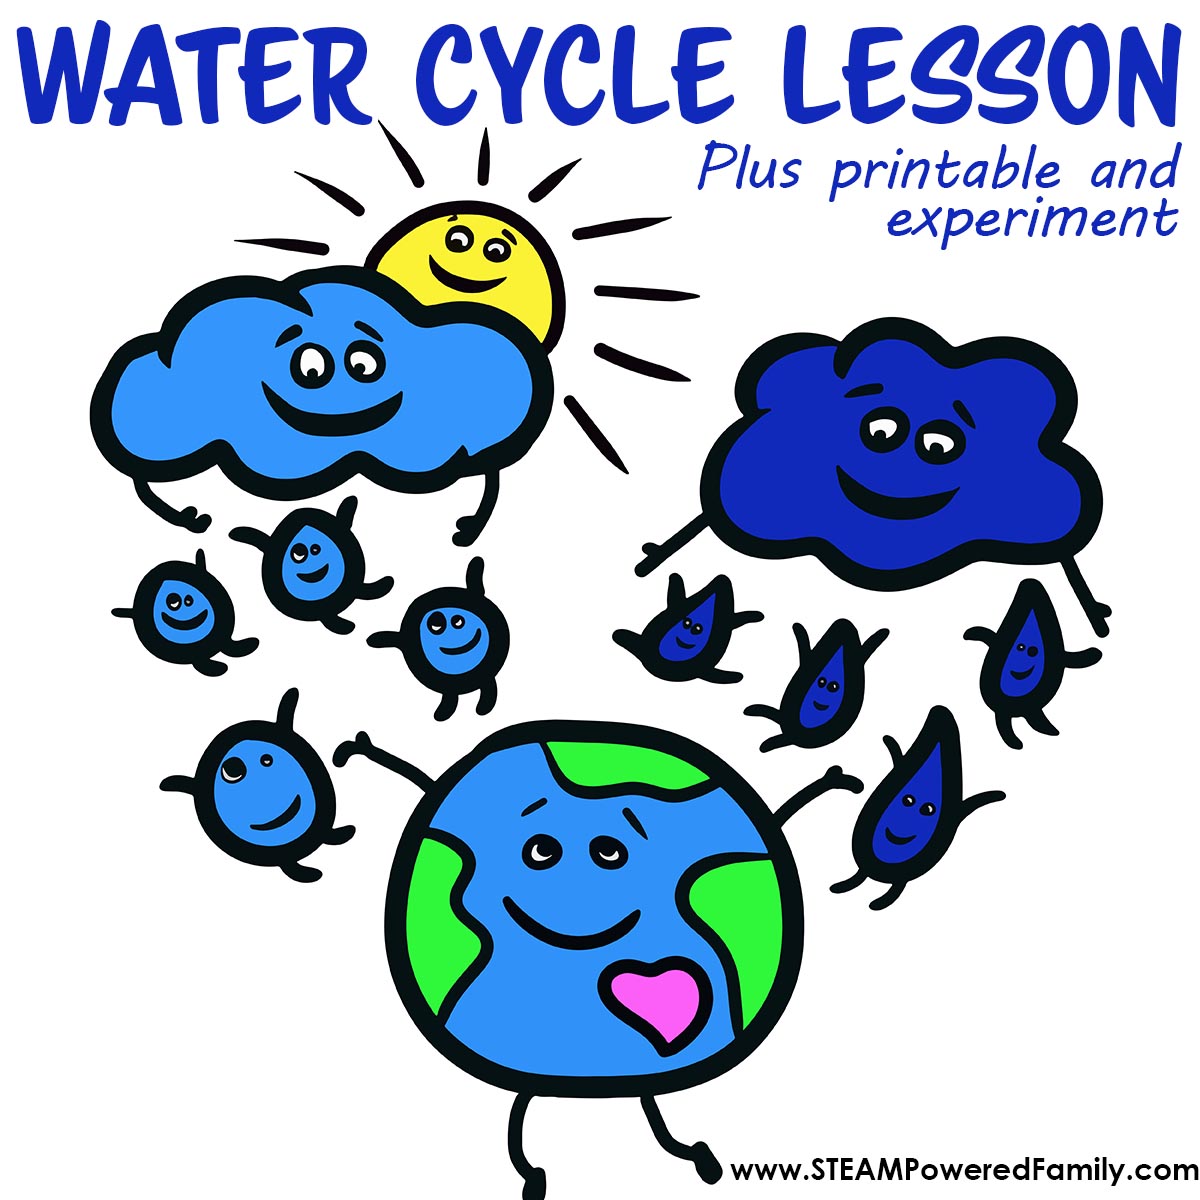 Water Cycle - 5th Grade Science Diagram | Quizlet-saigonsouth.com.vn